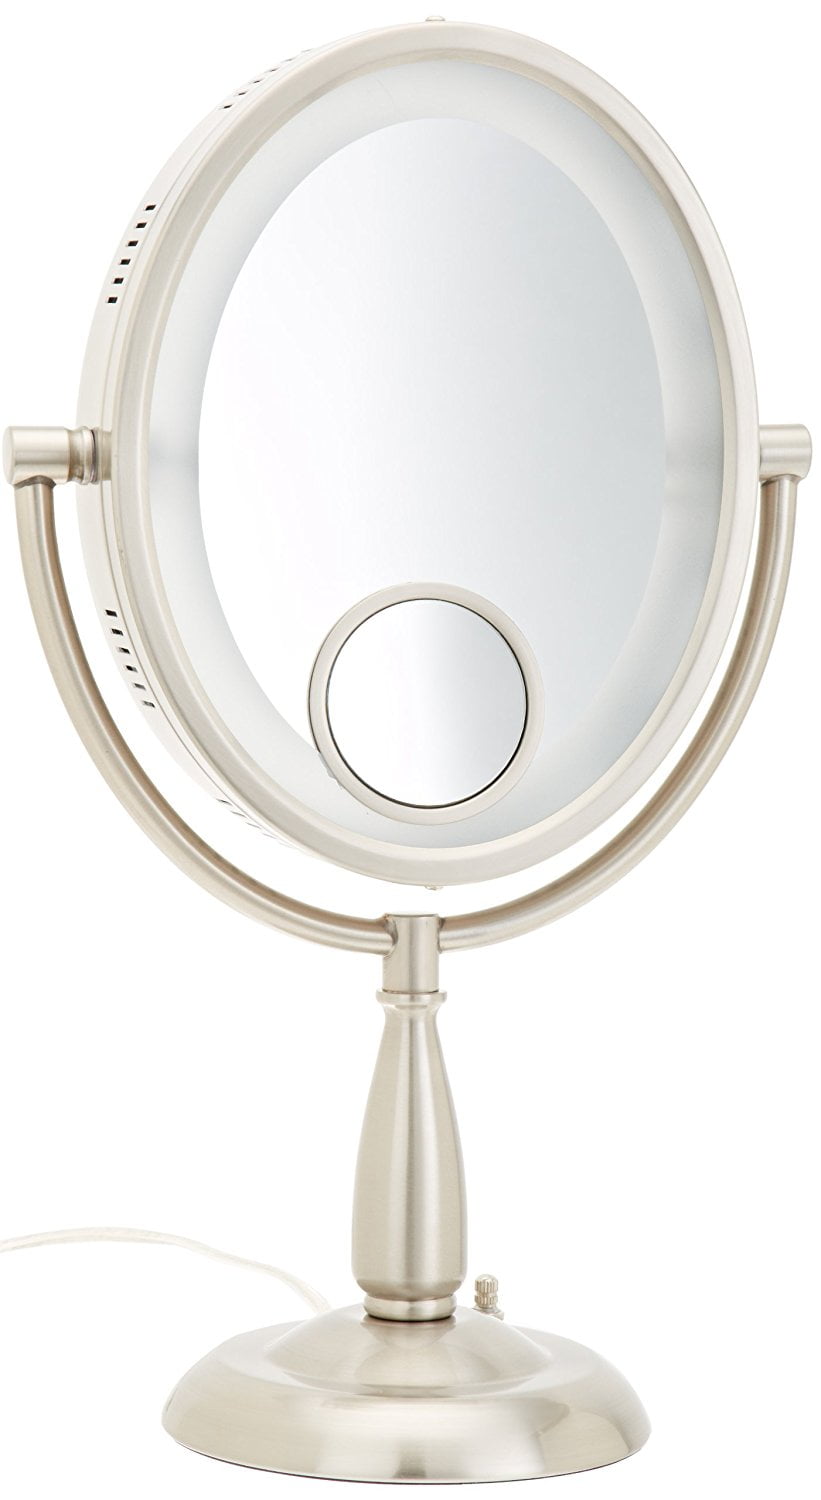 10 Inch Oval Lighted Vanity Mirror, Conair Makeup Mirror With Light Settings